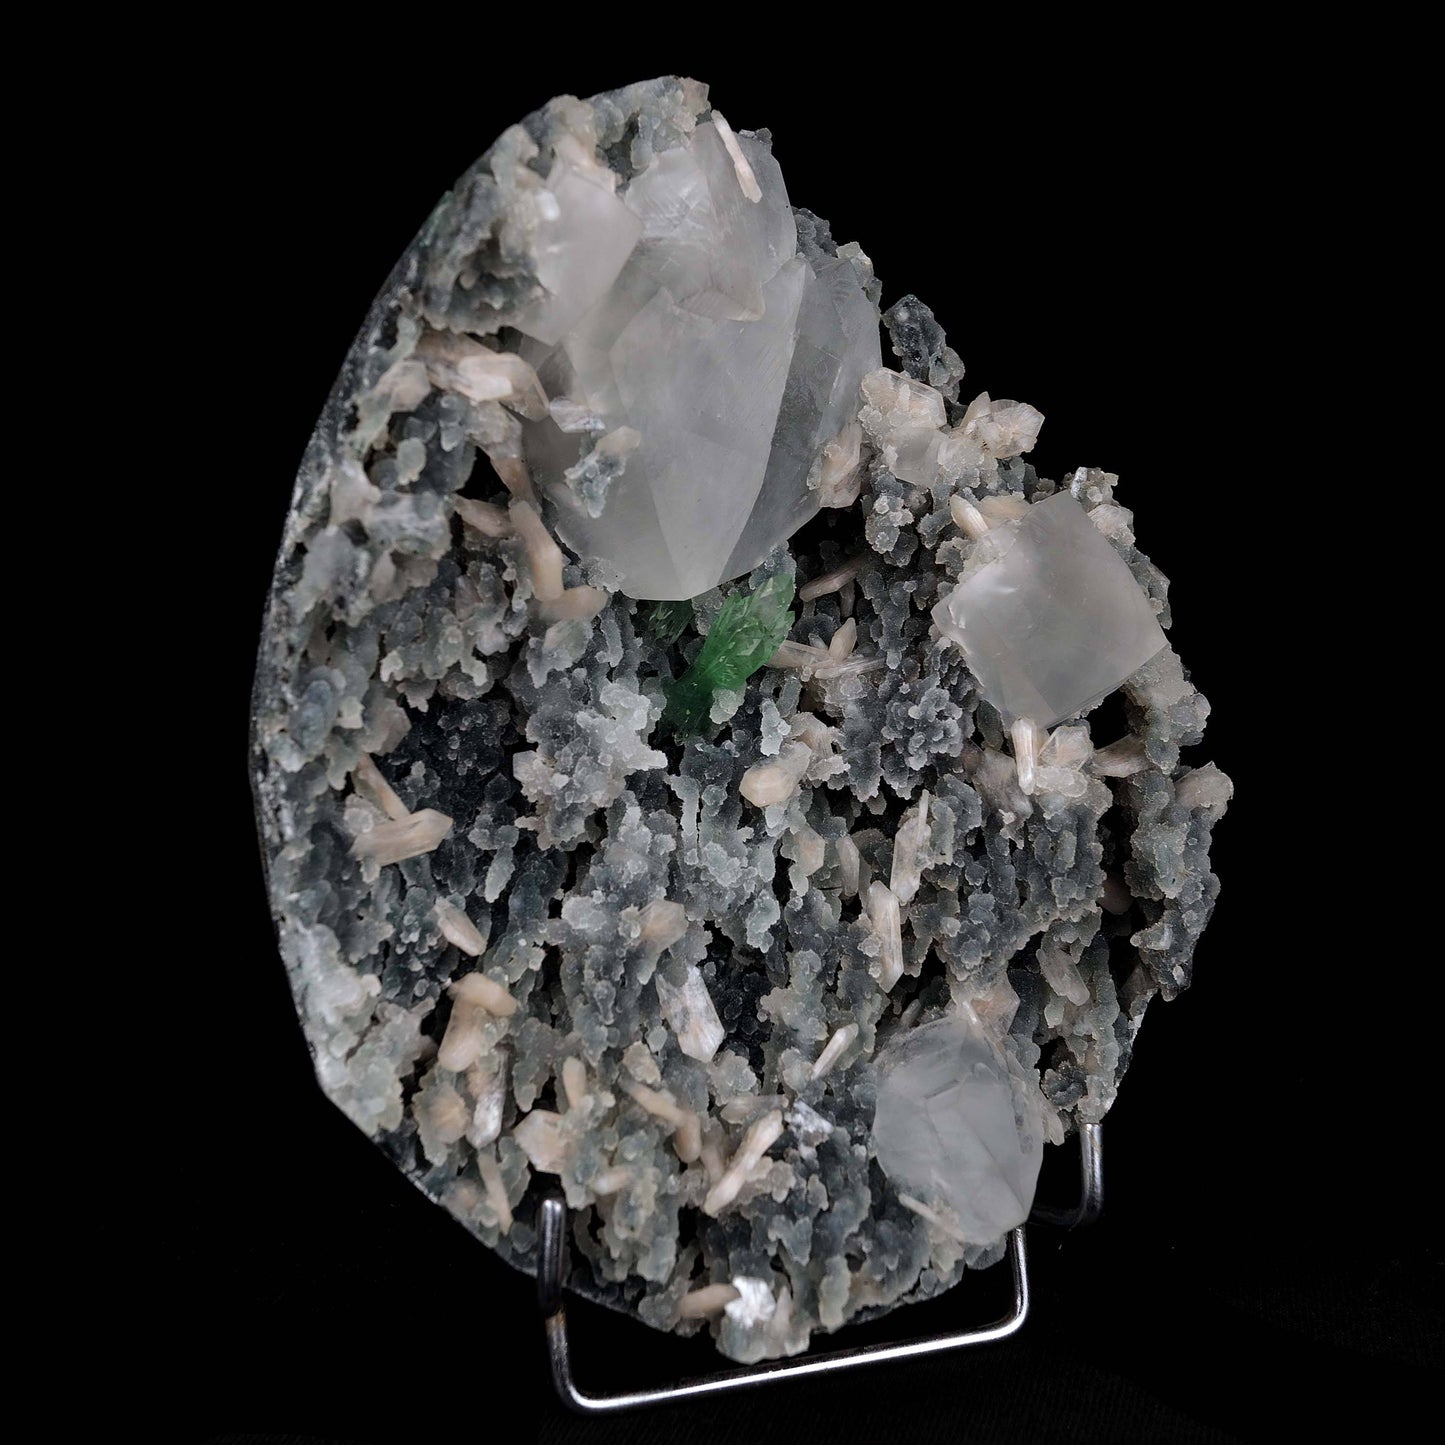 Calcite with Green Apophyllite with Stilbite (Excellent) Vug # B 4228  https://www.superbminerals.us/products/calcite-with-green-apophyllite-with-stilbite-excellent-vug-b-4228  Features:An exceptionally sculptural and impressive large combination zeolite specimen from Aurangabad. The very well prepared deep triangular vug in basalt matrix is lined with sparkly, bubbly, drusy gray chalcedony. The striking and aesthetic mound in the middle hosts pearlescent, flesh-pink, stilbite crystals,